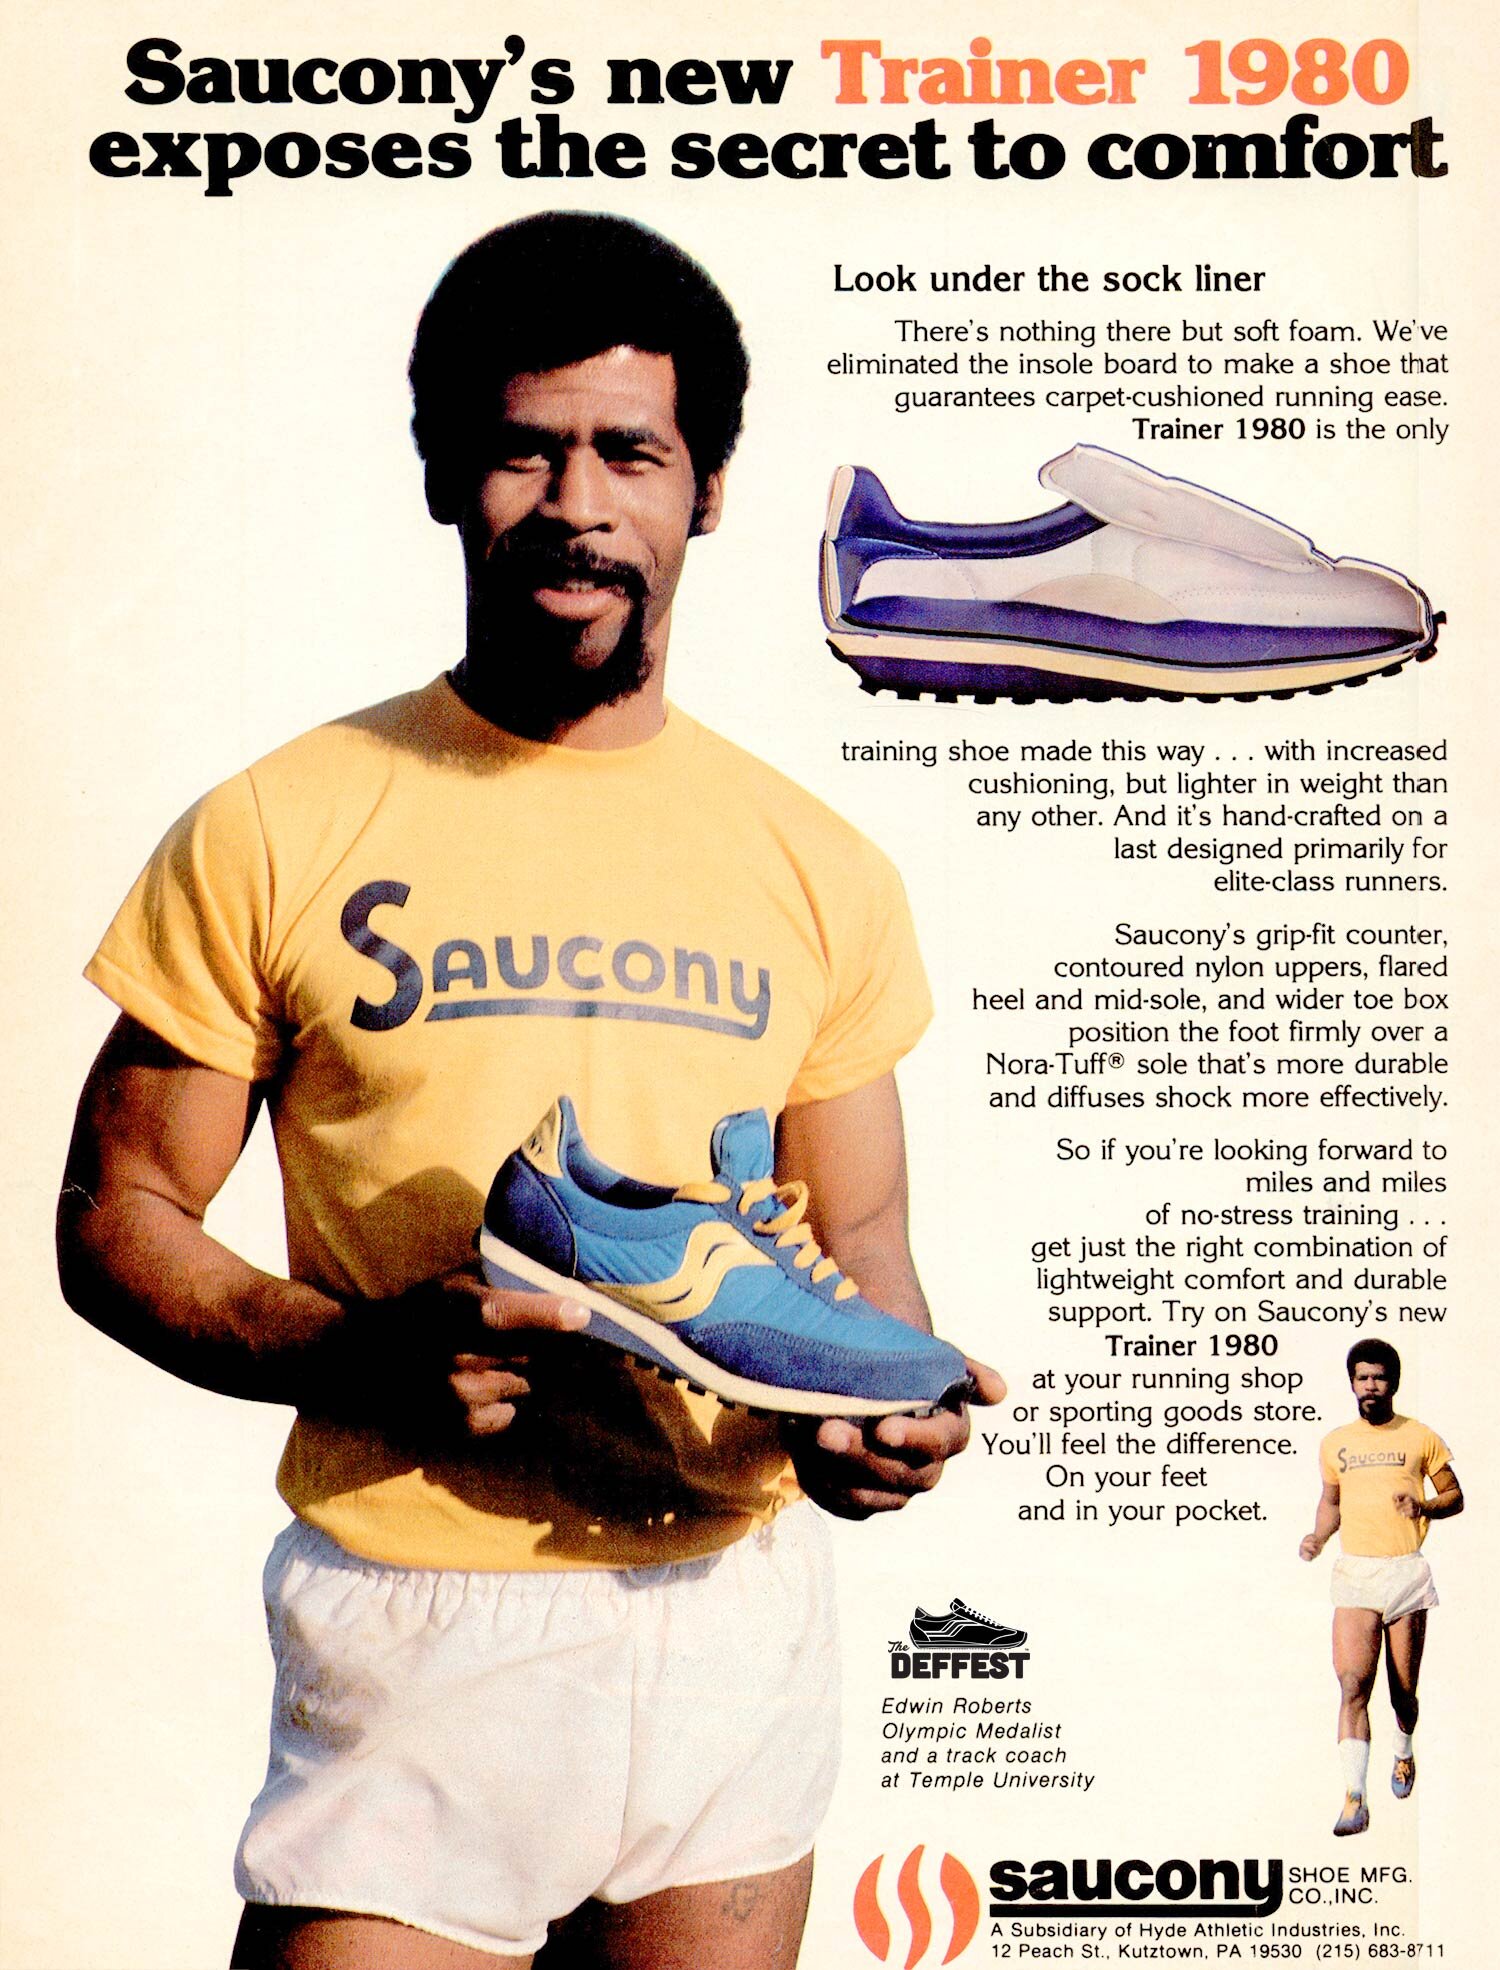 The Deffest®. A vintage and retro sneaker blog. — Saucony Trainer 1980  vintage sneaker ad